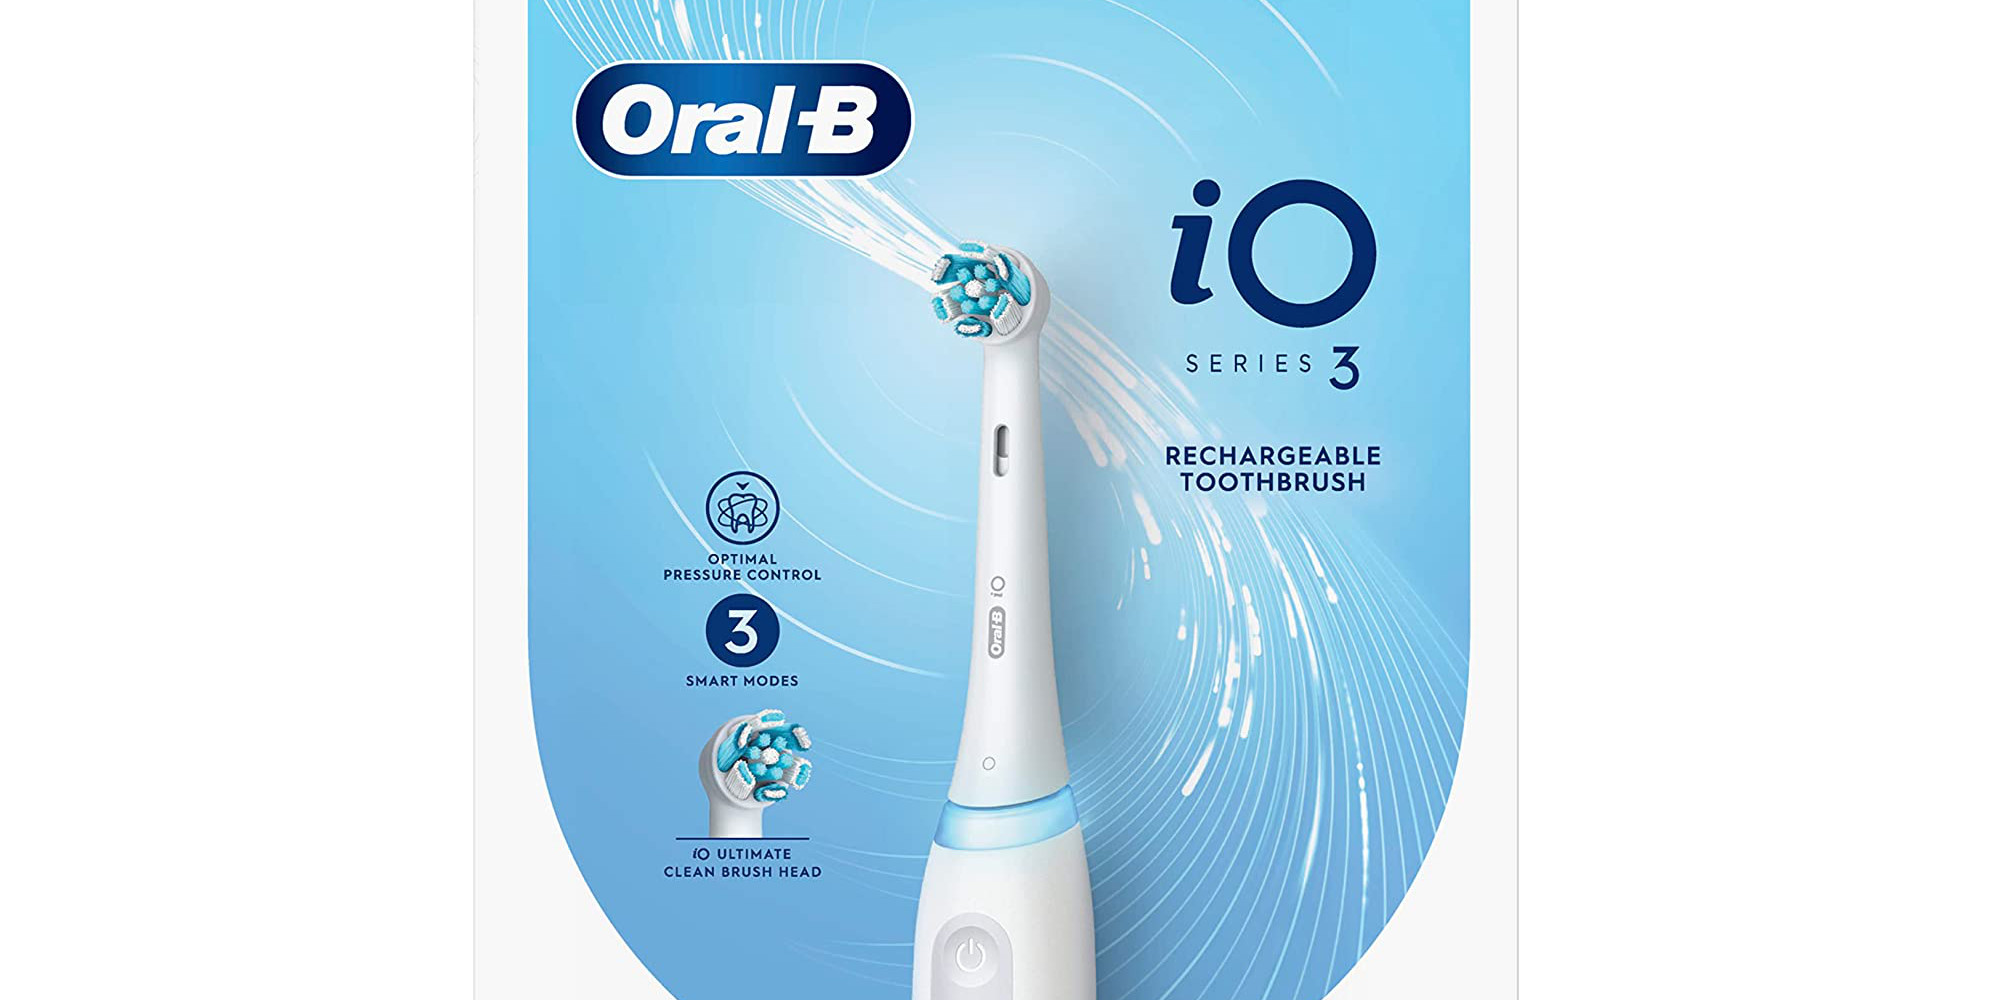 Oral-B's new iO Series 3 electric toothbrush with LED sensor